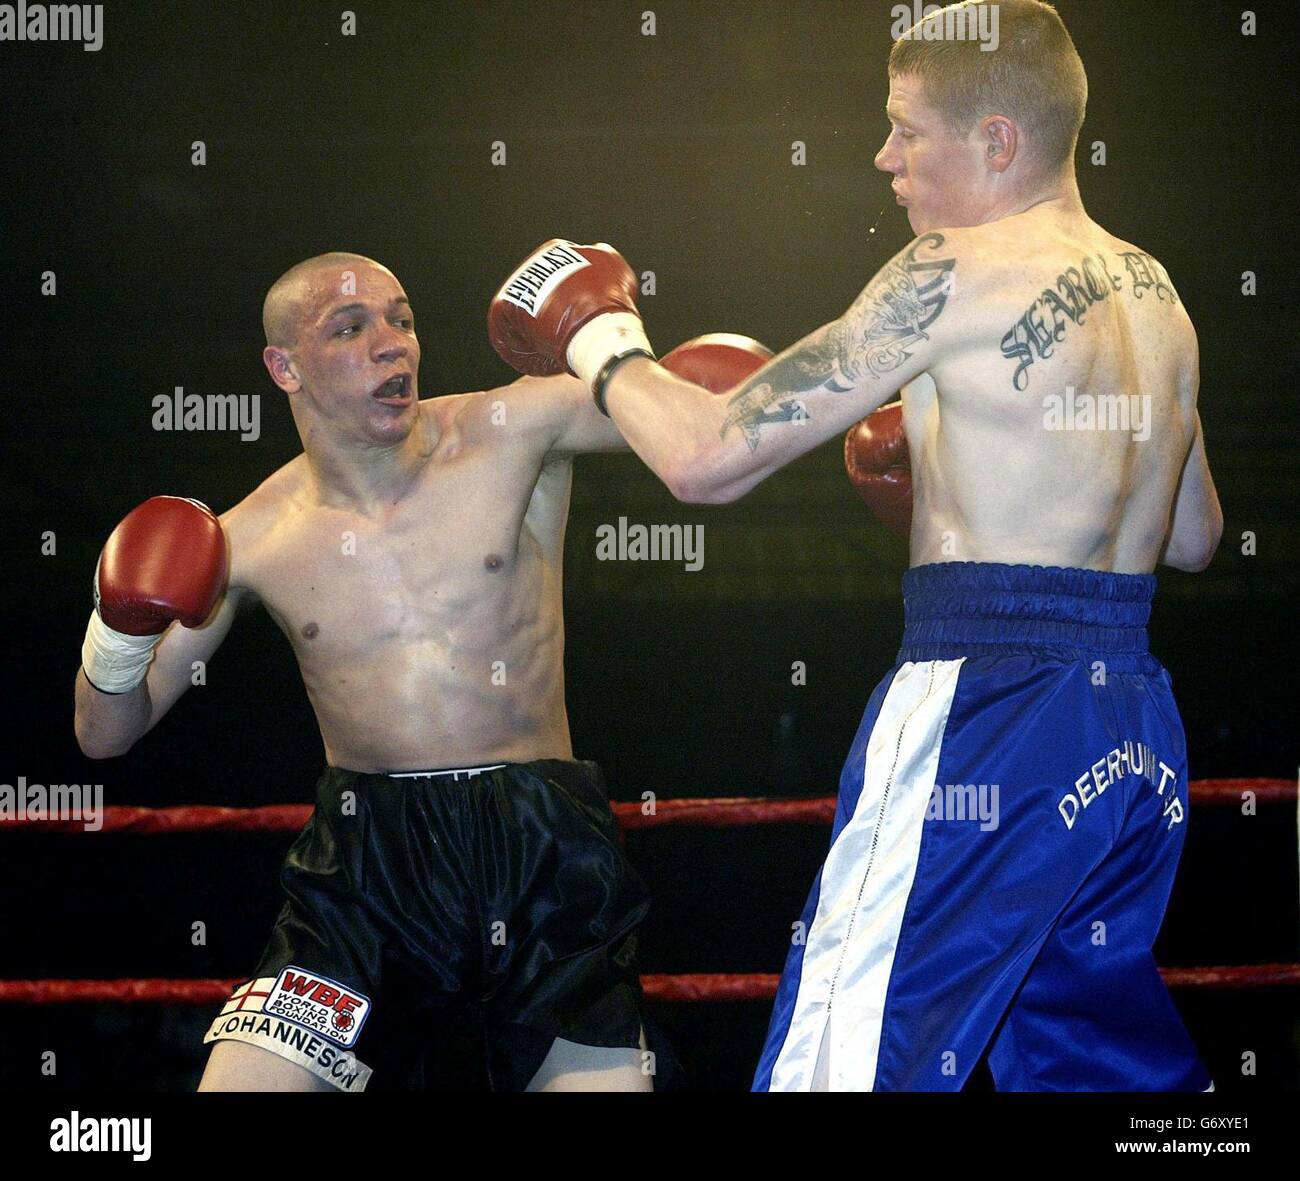 Carl 'Bo' Johanneson from Leeds (now based in USA) lands a heavy left during his victory over Scotland's Andrew Ferrans (right), during their WBF World Super Featherweight Championship at Whitchurch Sports Centre, Bristol. Stock Photo